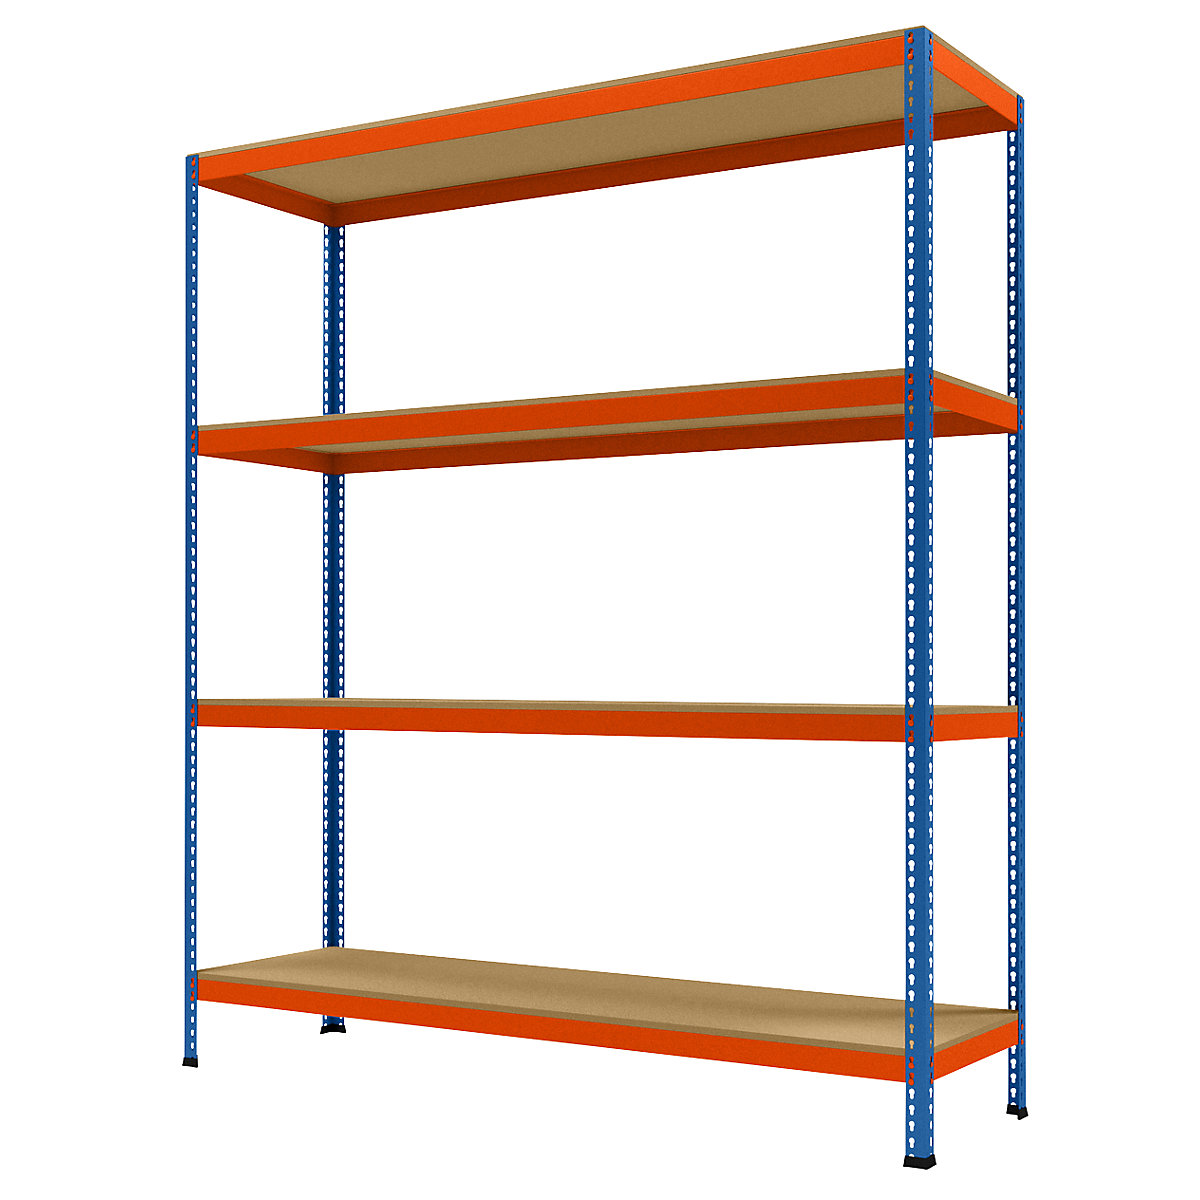 Wide span heavy duty shelving, height 2438 mm, overall depth 621 mm, width 2146 mm